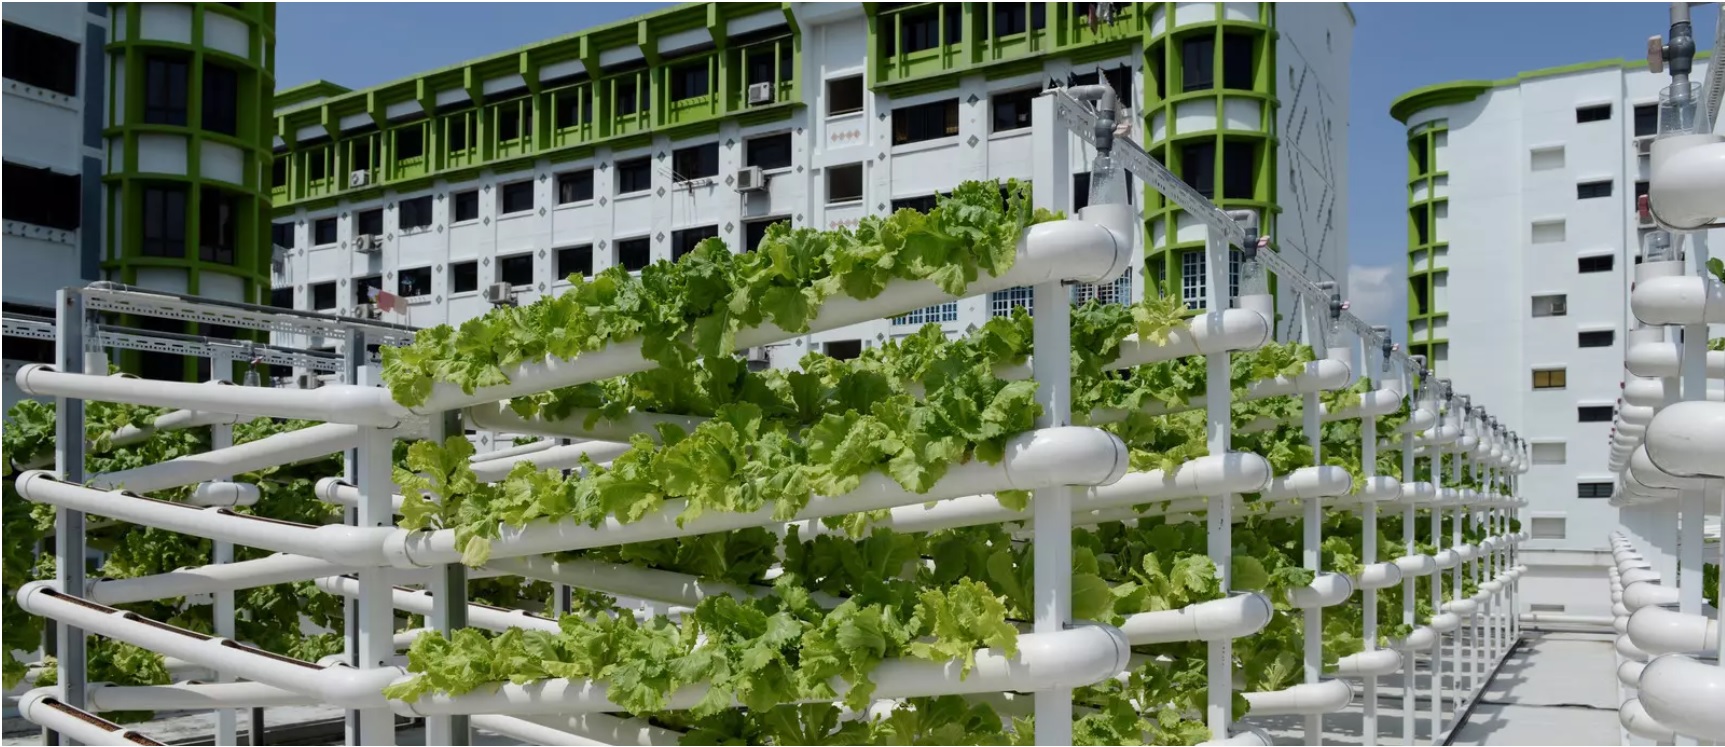 Urban farming is an excellent way to use space for agriculture. (Image: Reuters/Loriene Perera)